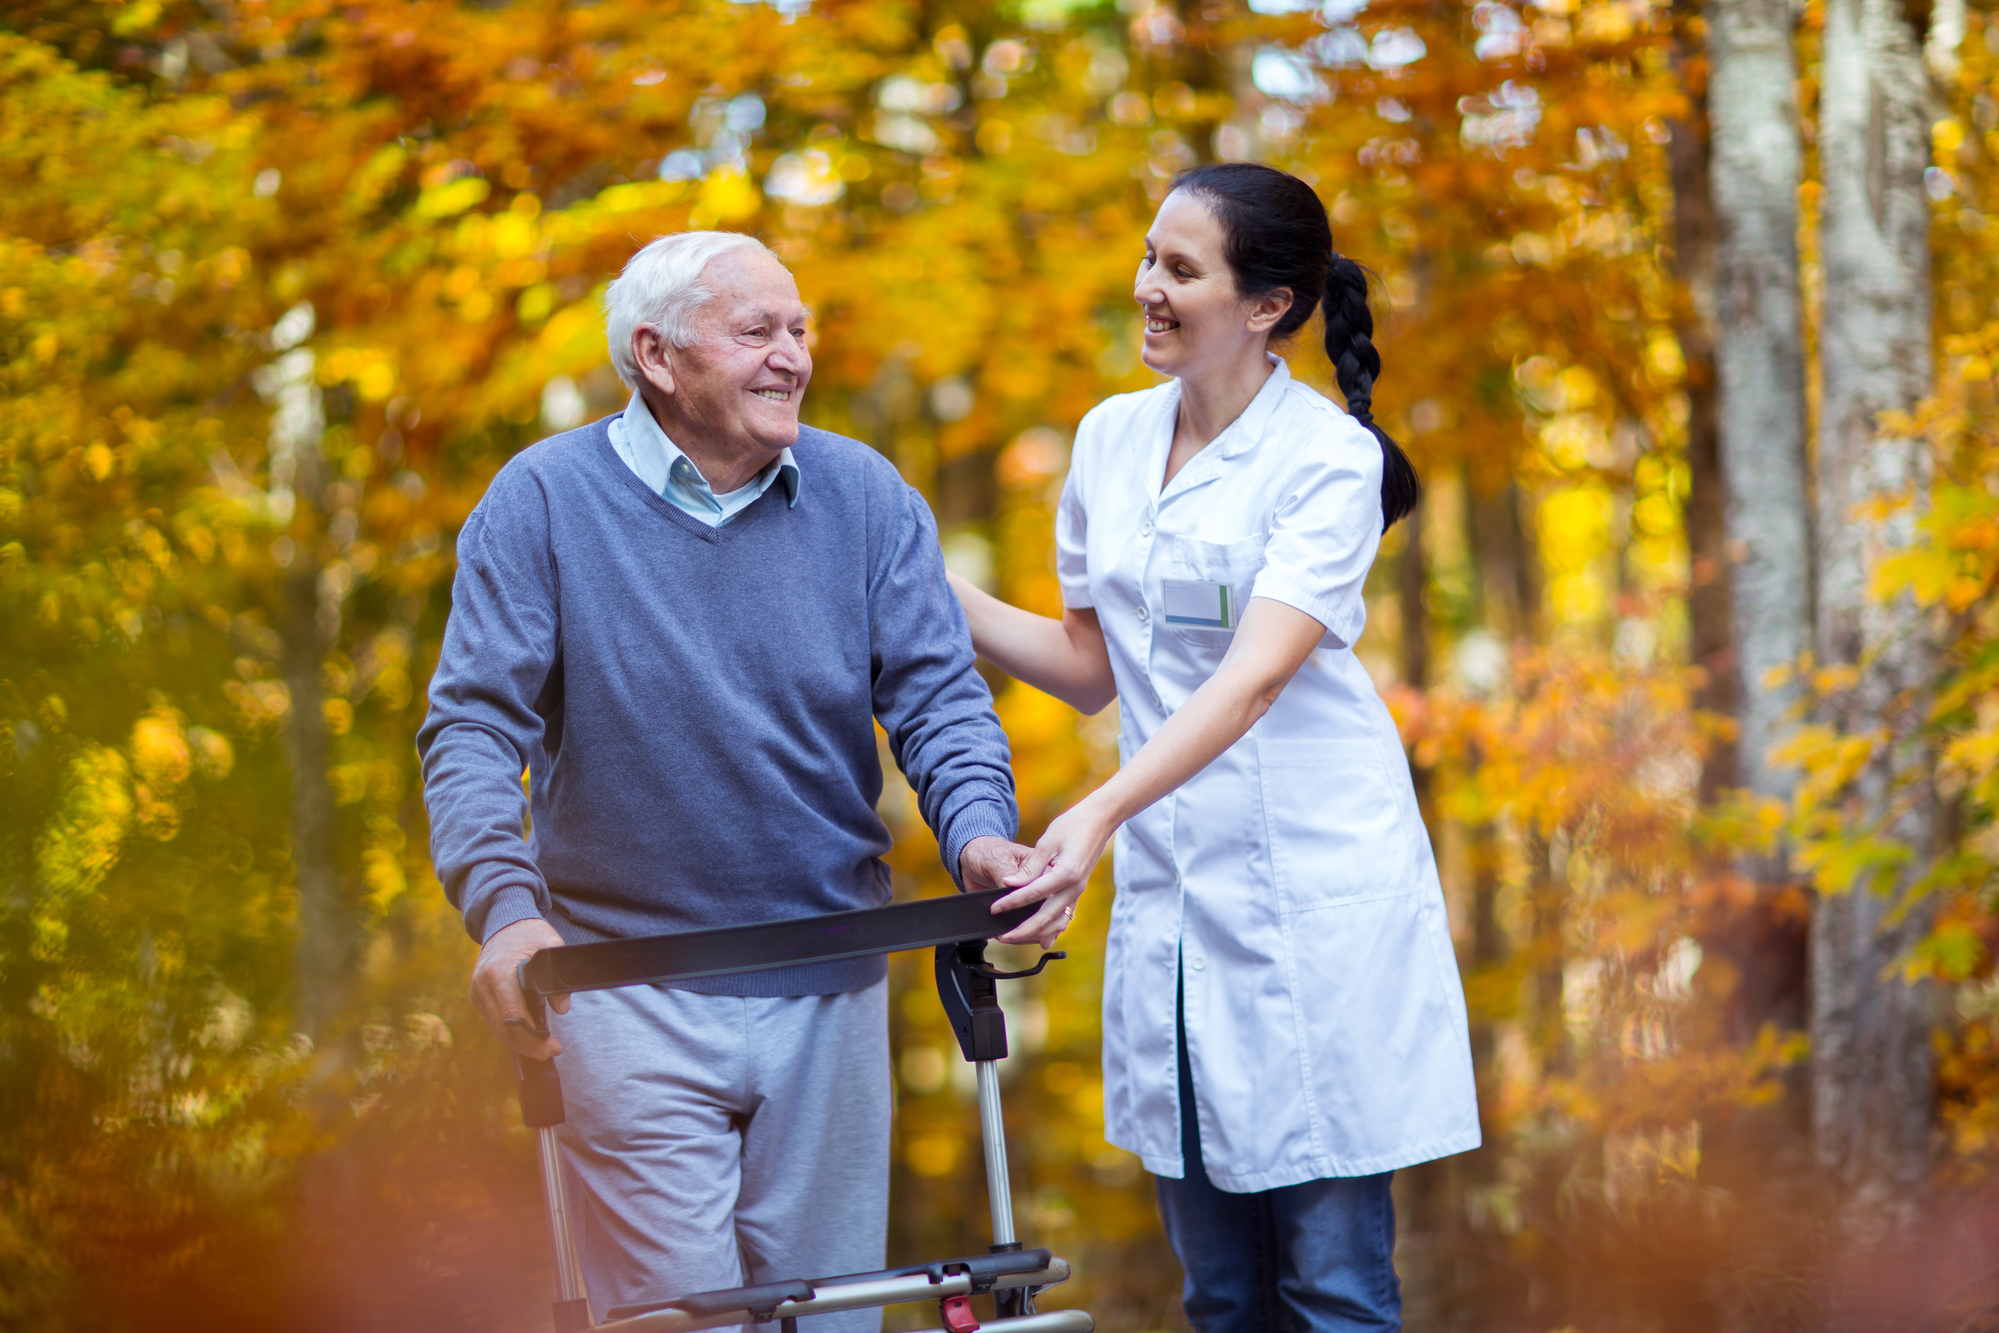 Senior-Friendly Activities for Fall